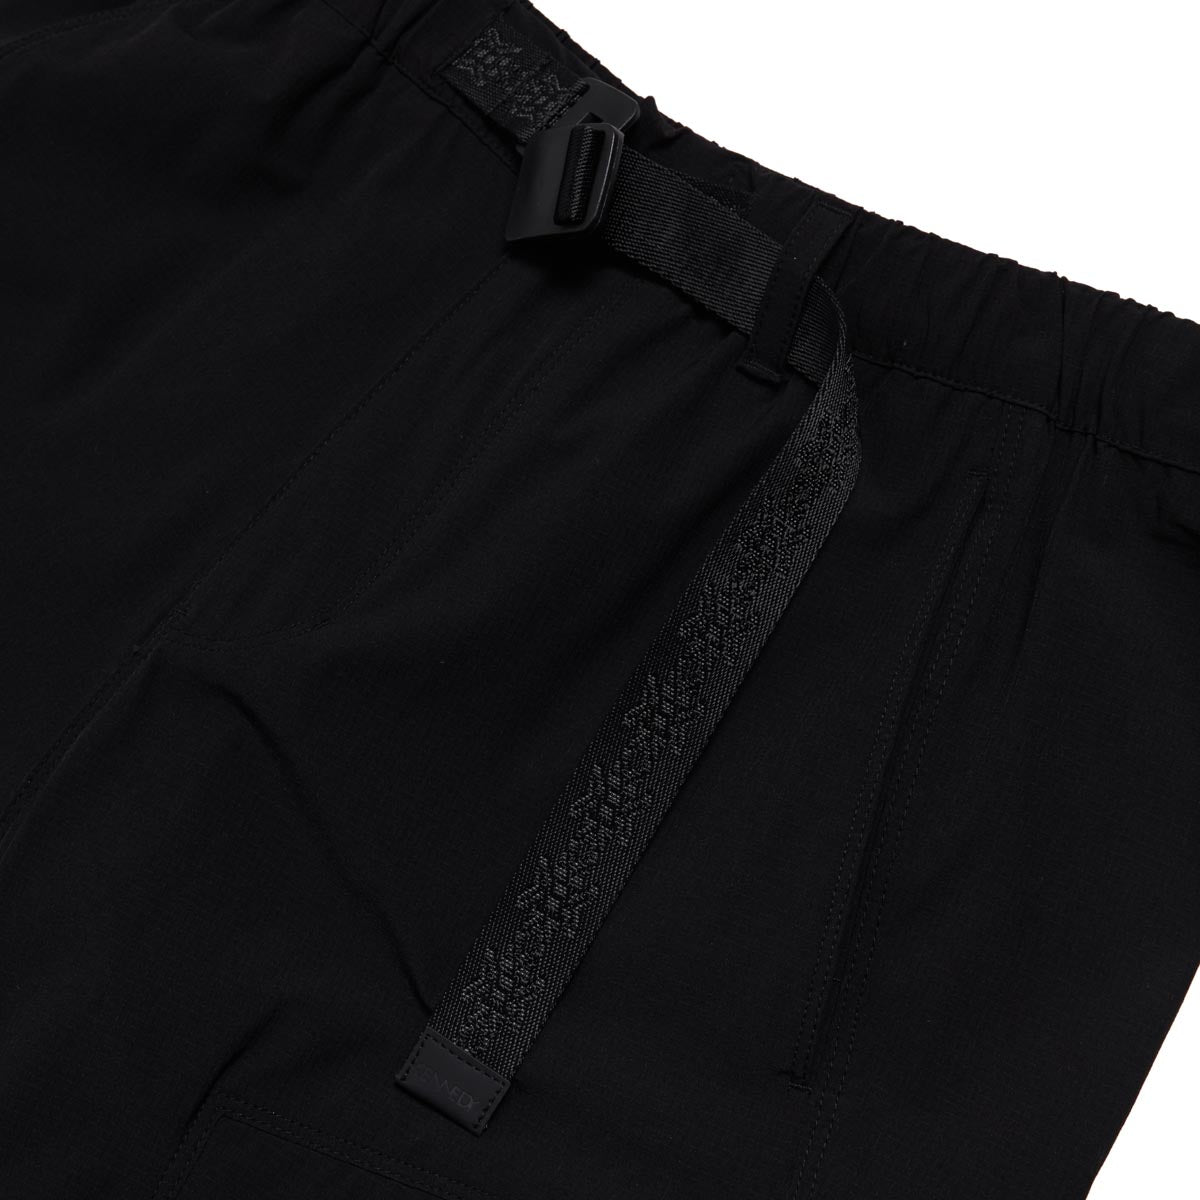 Kennedy The Ascension Cargo Pants - Black image 4